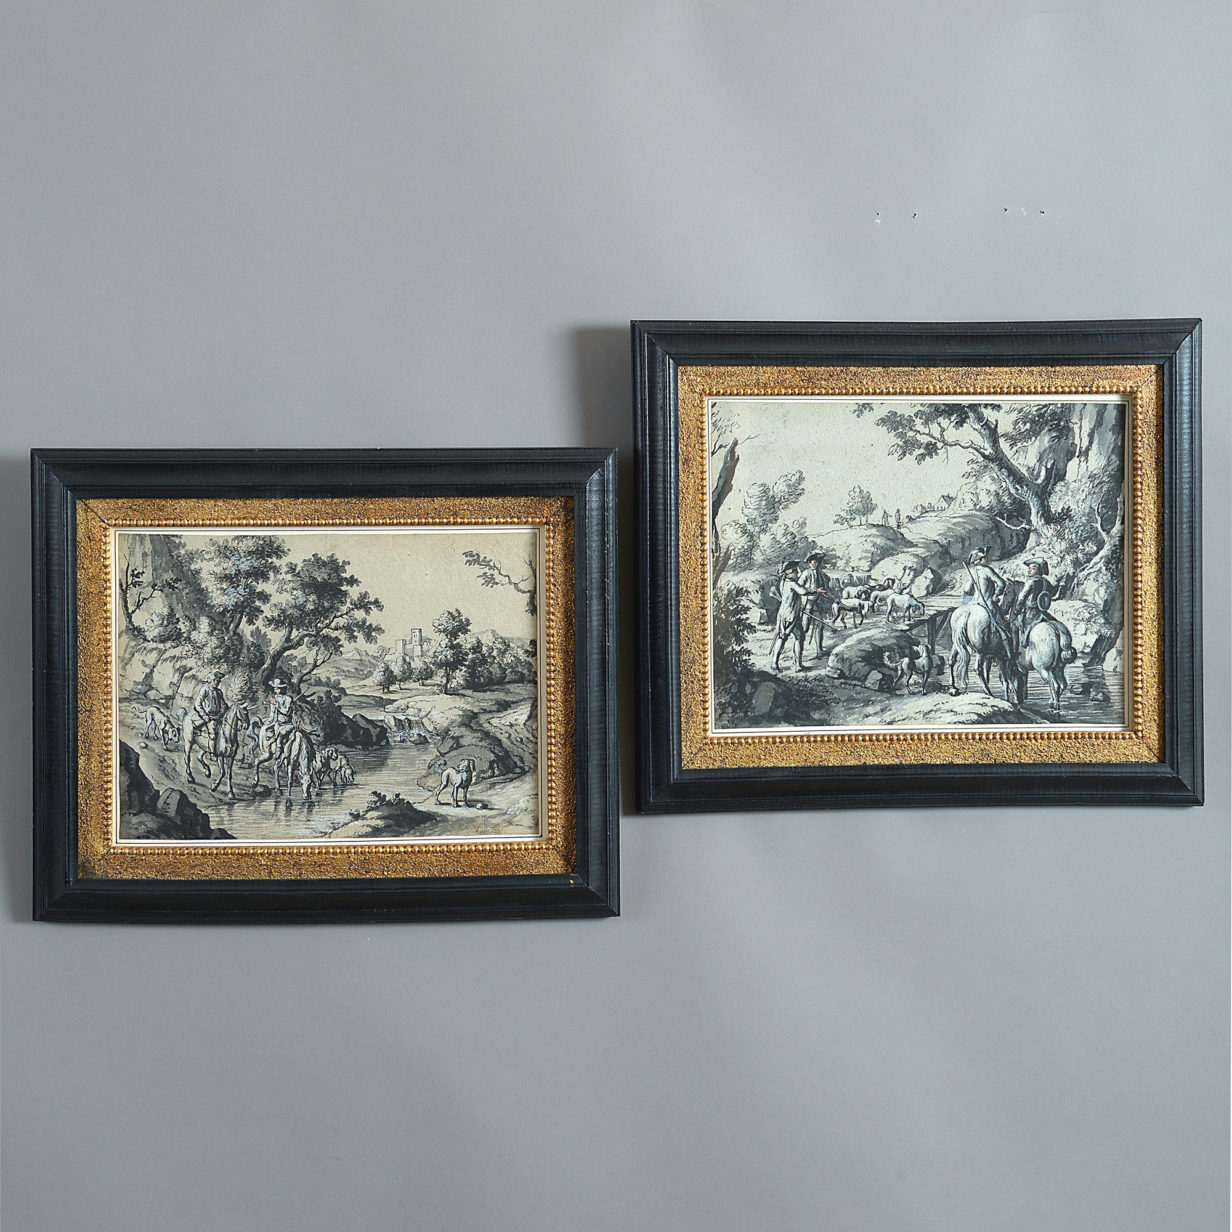 Two 18th century pen and ink landscape drawings